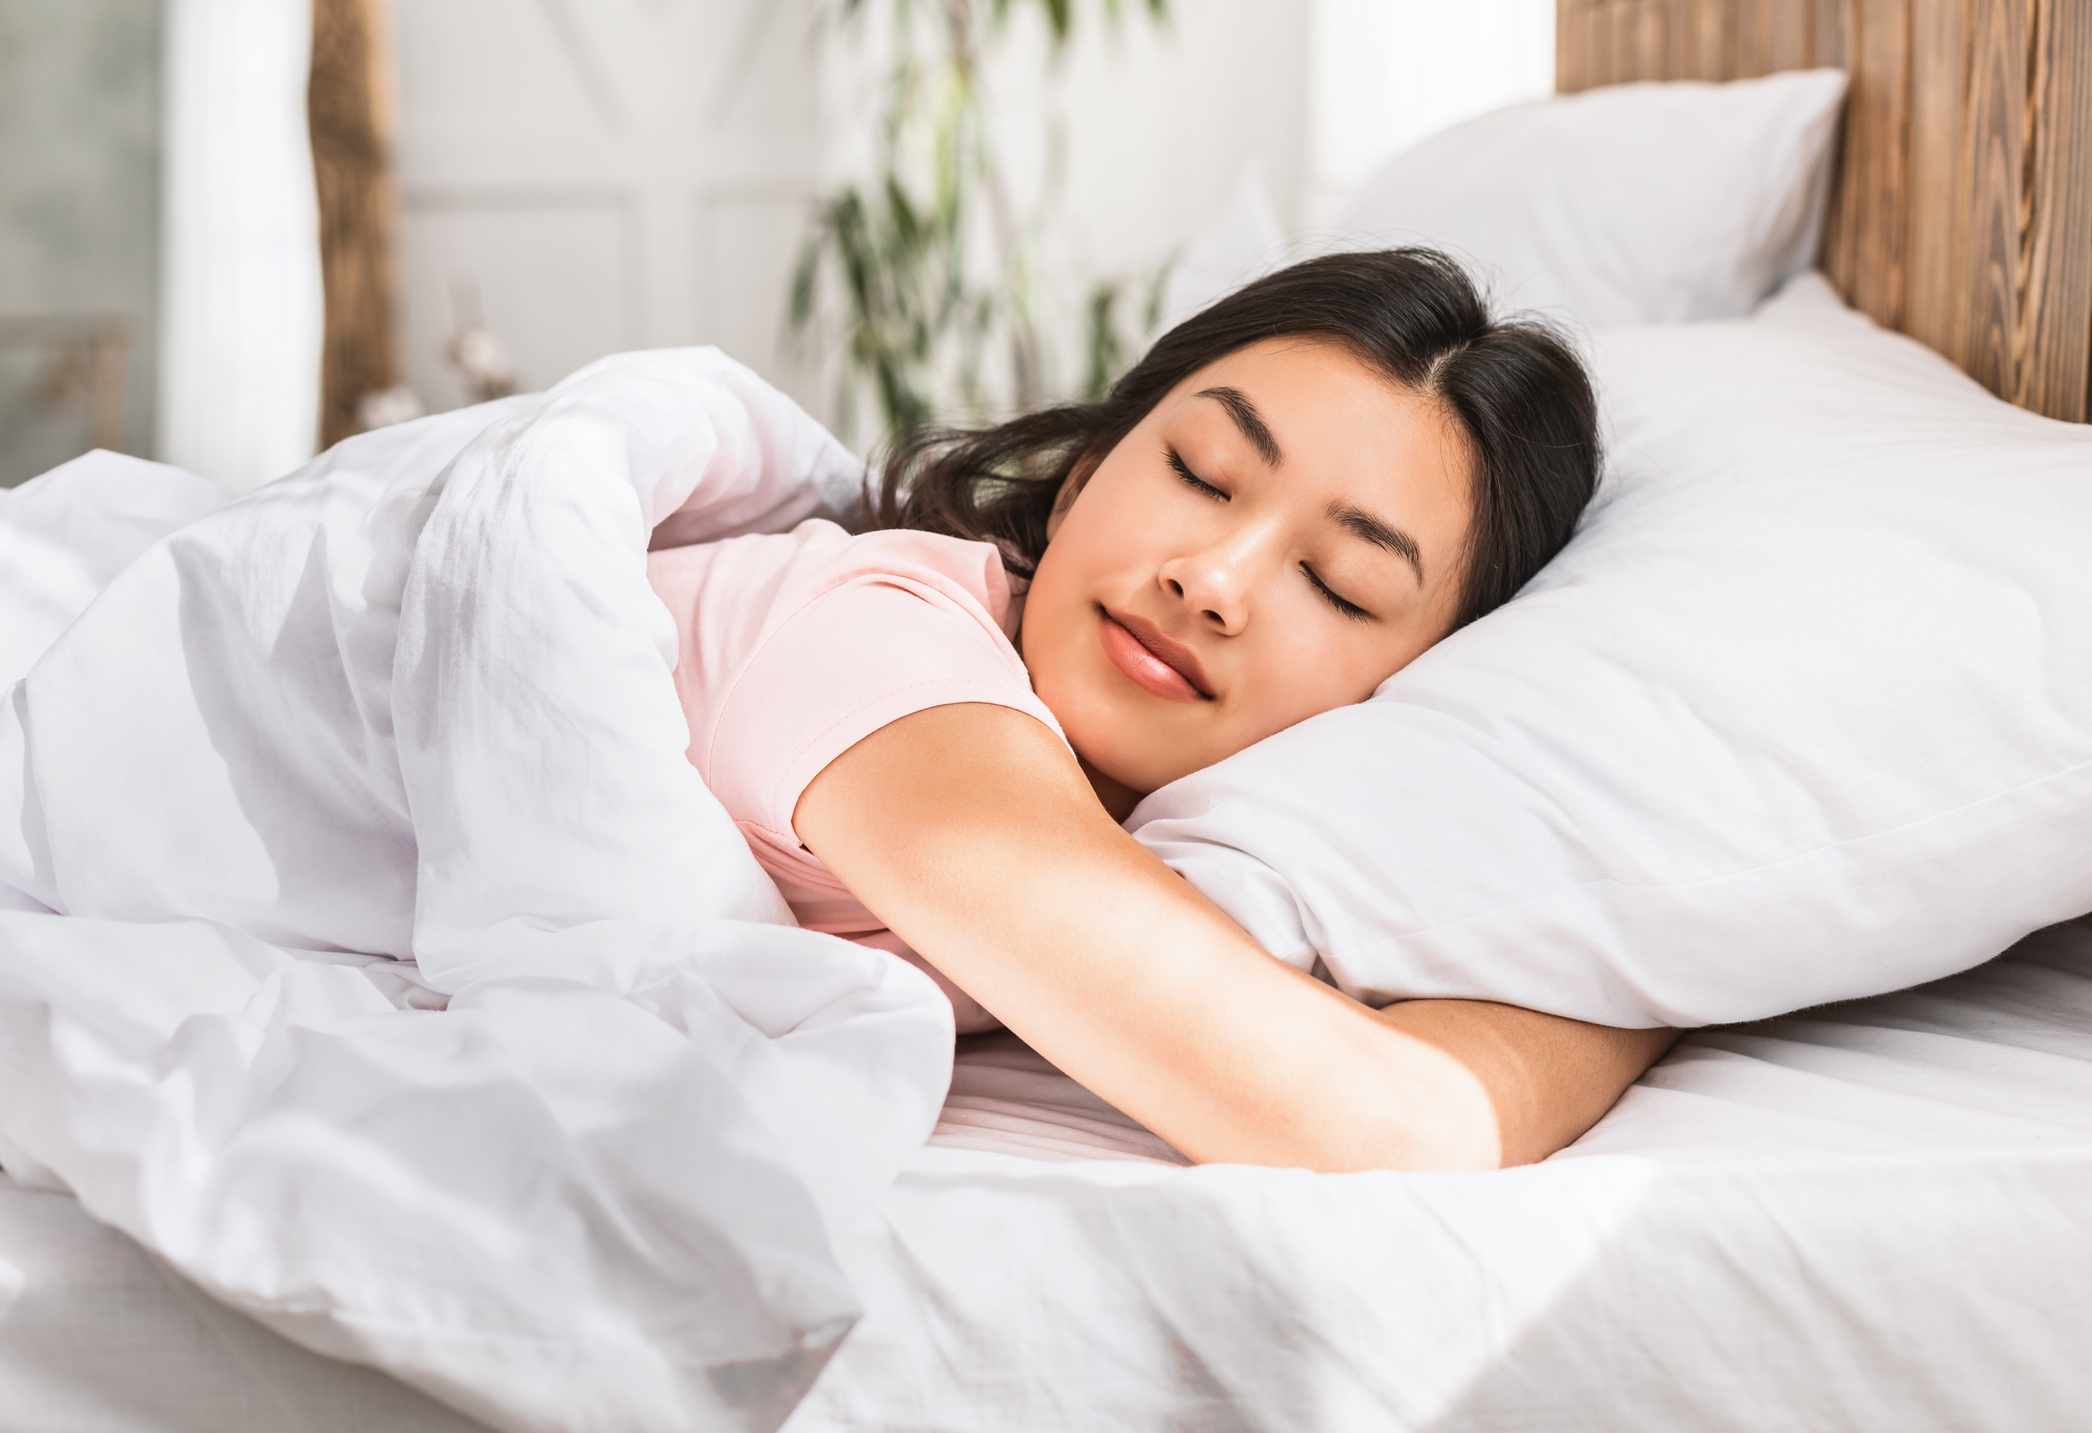 The 20 Ultimate Tips for How to Sleep Better | Sleep Foundation